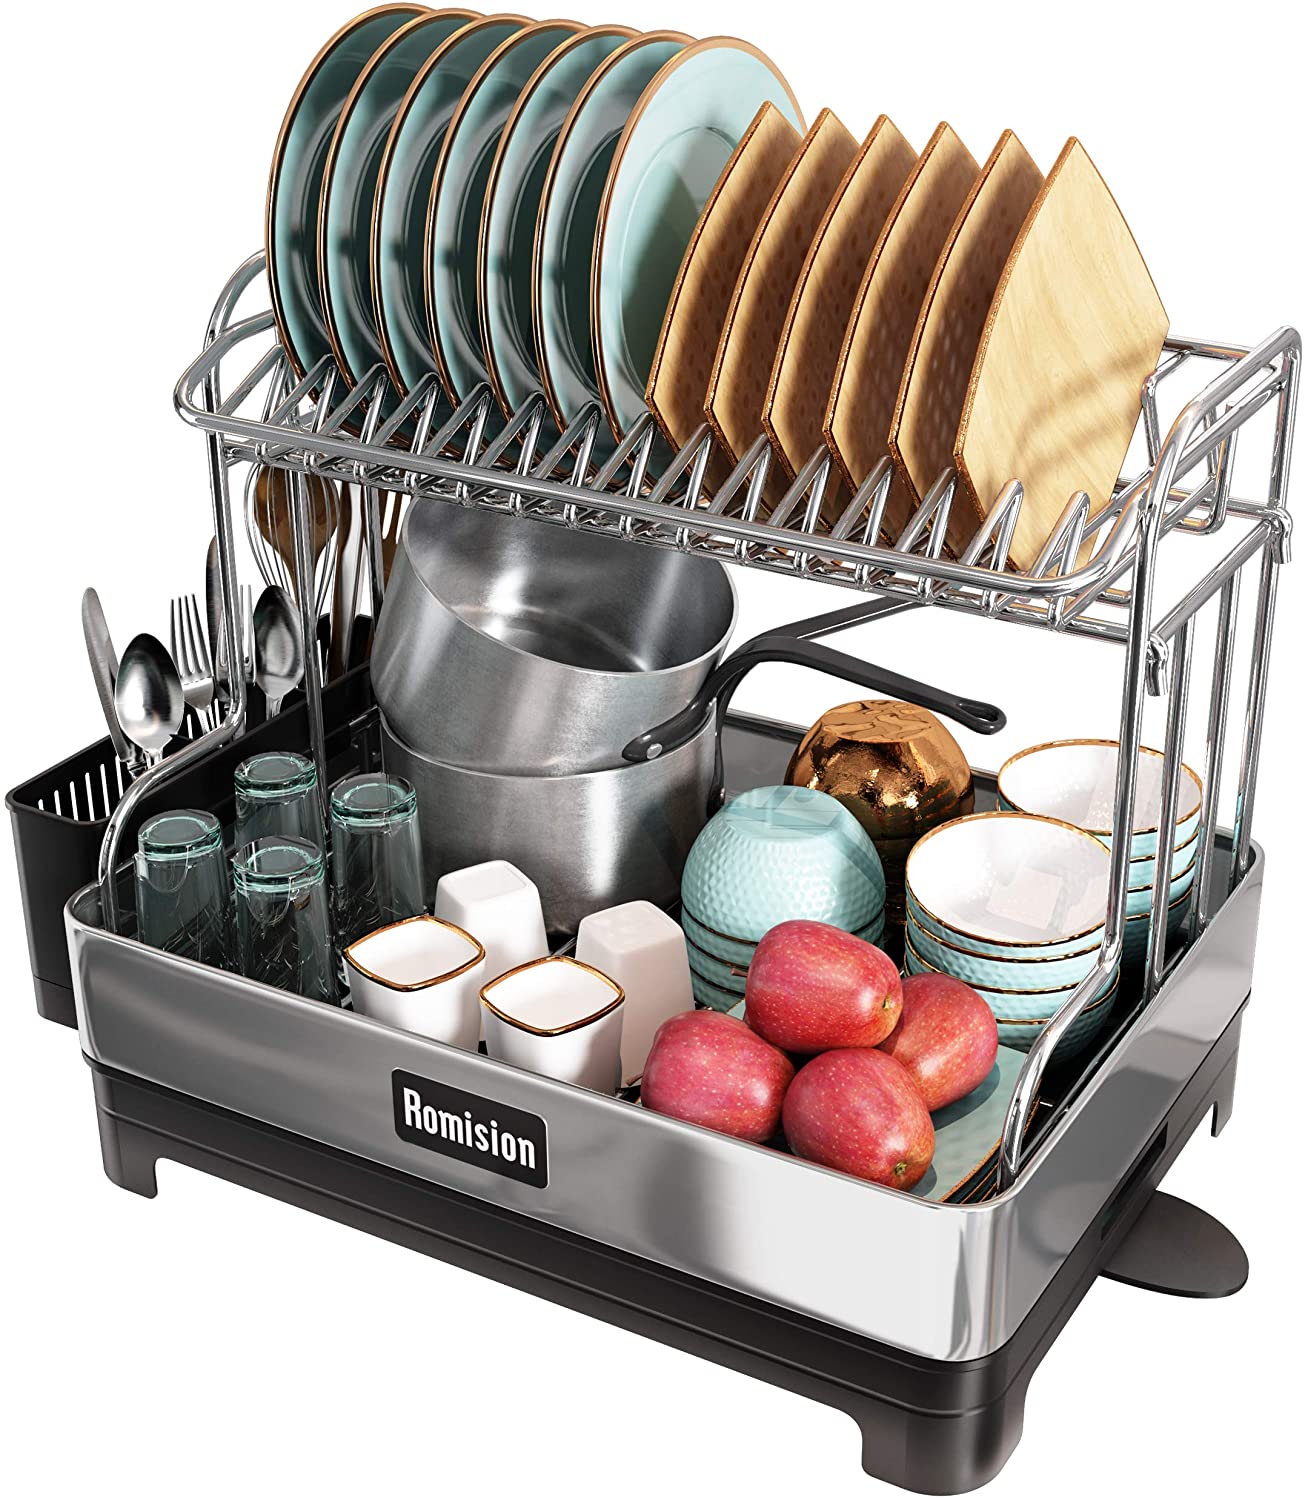 Romision Stainless Steel dish rack